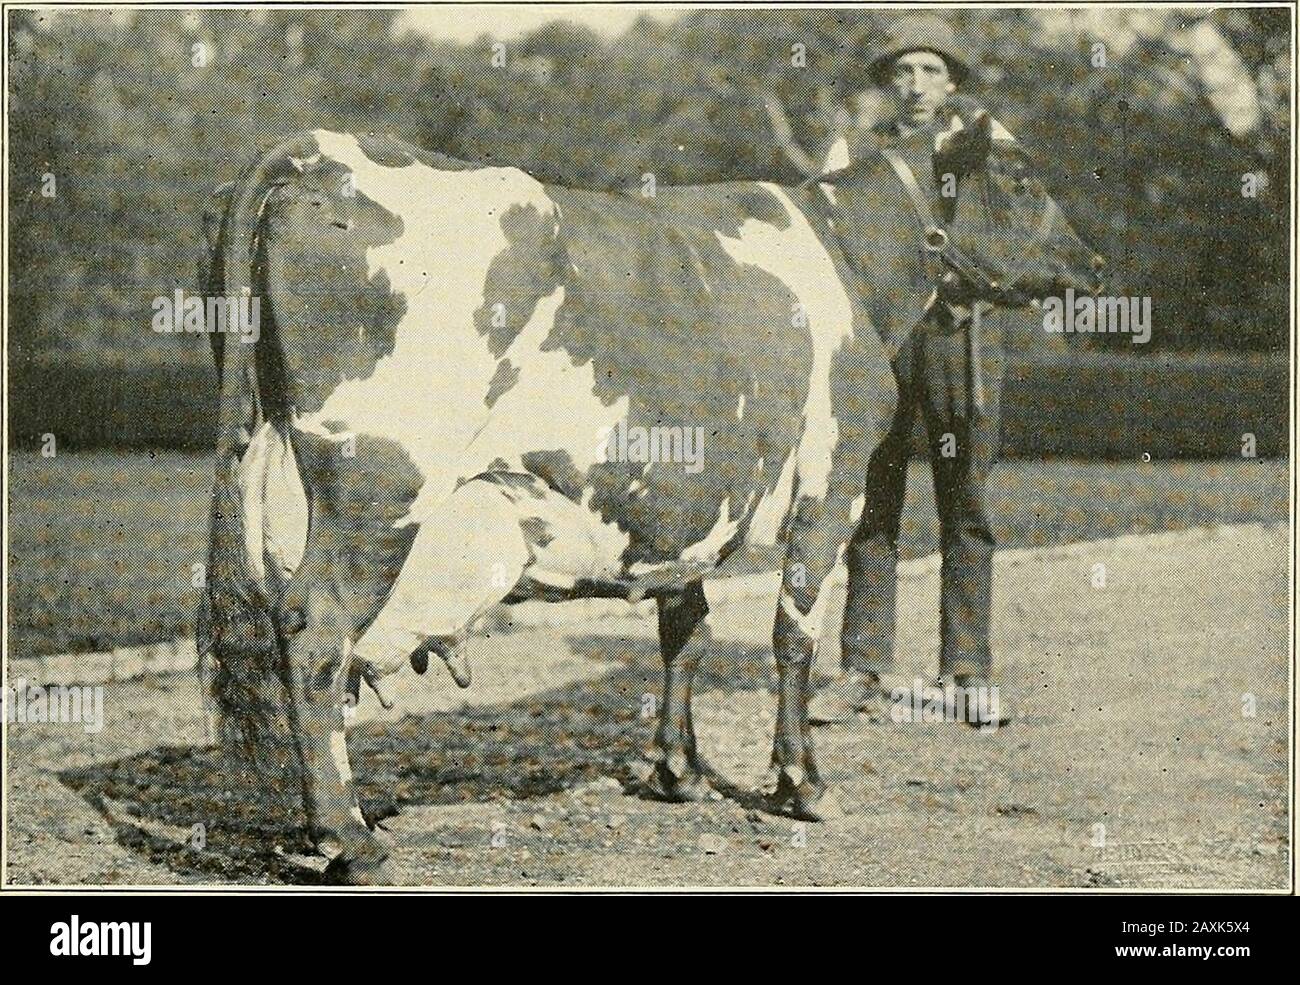 Ayrshire year book . Jean Armoue Record: 20.174 lbs. milk, 774.73 lbs. fat, 912 lbs. butter. 3.81% fat Owned by Mrs. F. D. Erhardt, West Berlin, Vt.. Eugenie Douglas Record: 12,570 lbs. milk, 479.70 lbs. fat, .564 lbs. butter, 3.82% fat Owned by Highland Farm, Bryn Mawr, Pa. 94 Two Year Old Form—Contimied. Lbs. Lbs. Lbs. %Milk. Fat. Butter. Fat. 34290 Imp. Lochfergus Diana, 912 7,367 295.41 348 4.01 Owned by C. B. Stevens, St. Johns-bury, Vt. 21246 Kittie K. 3d, 68 7,364 329.18 387 4.47 Owned by John E. Valentine, Bryn  ^ Mawr, Pa. 27608 Molly Hebron, 802 7,346 289.18 338 3.94 Owned by Friends Stock Photo